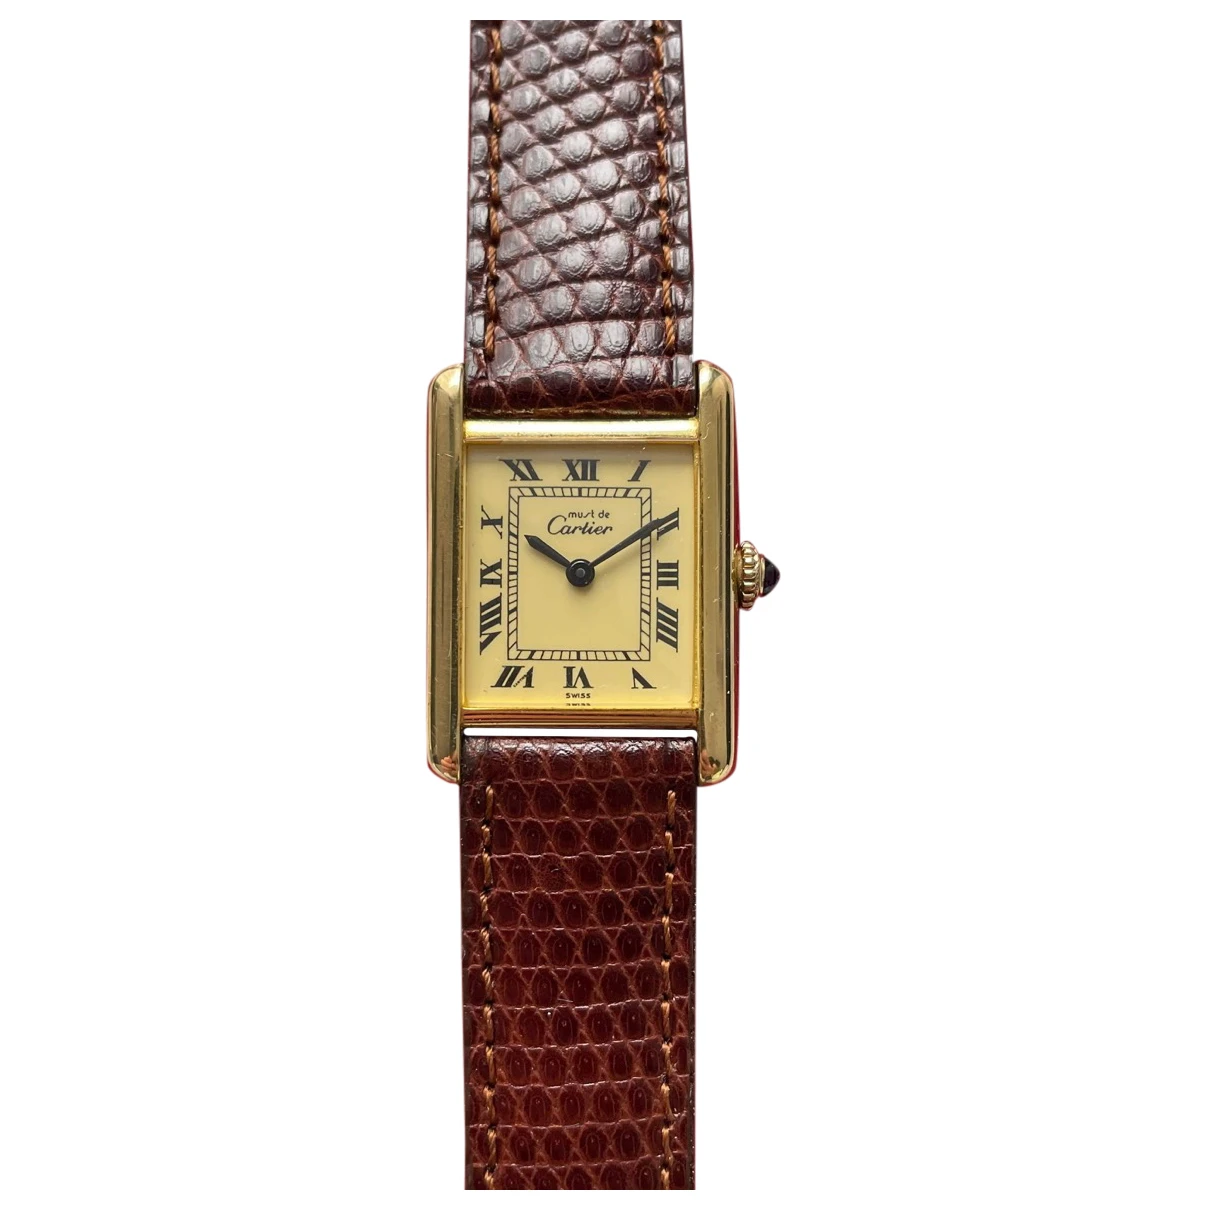 accessories Cartier watches Tank Must for Female Gold plated. Used condition